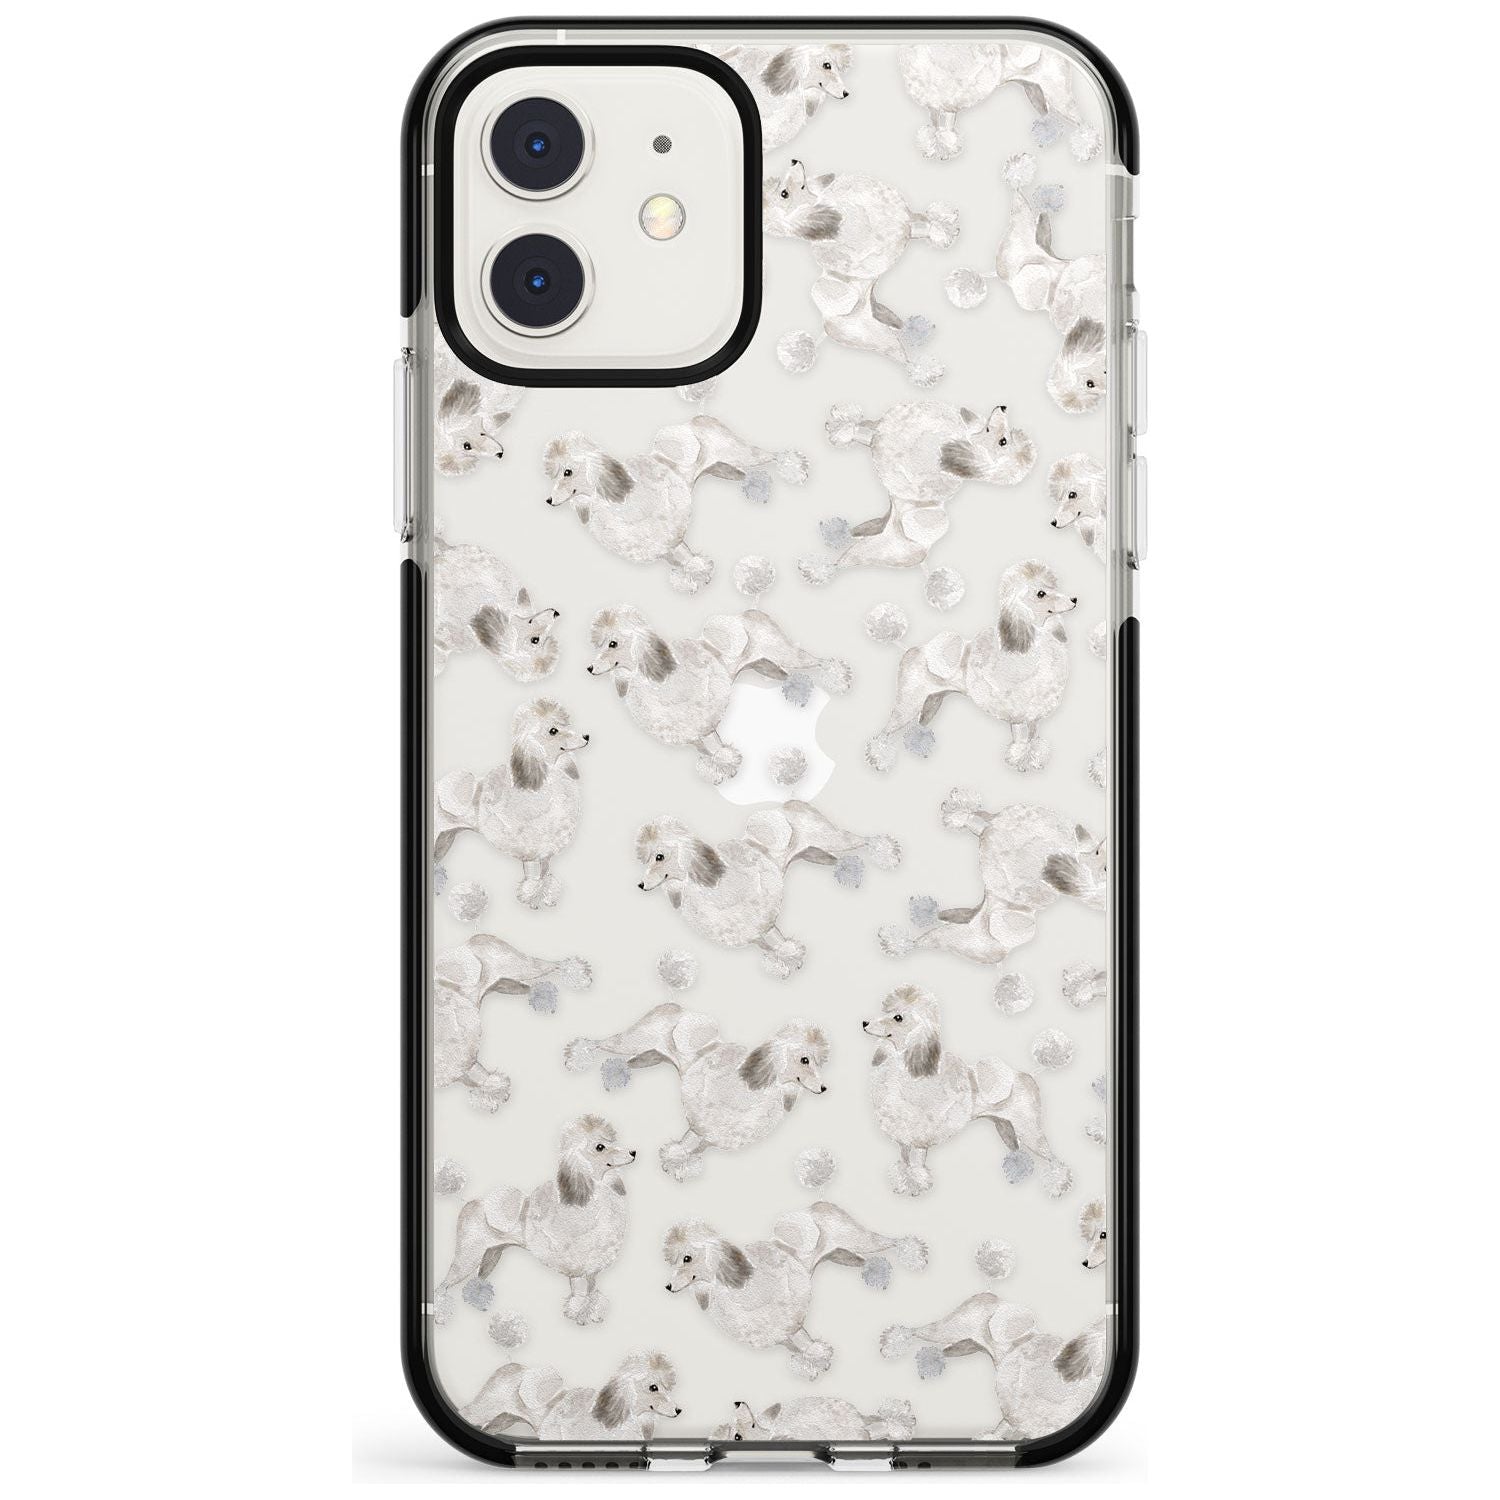 Poodle (White) Watercolour Dog Pattern Black Impact Phone Case for iPhone 11